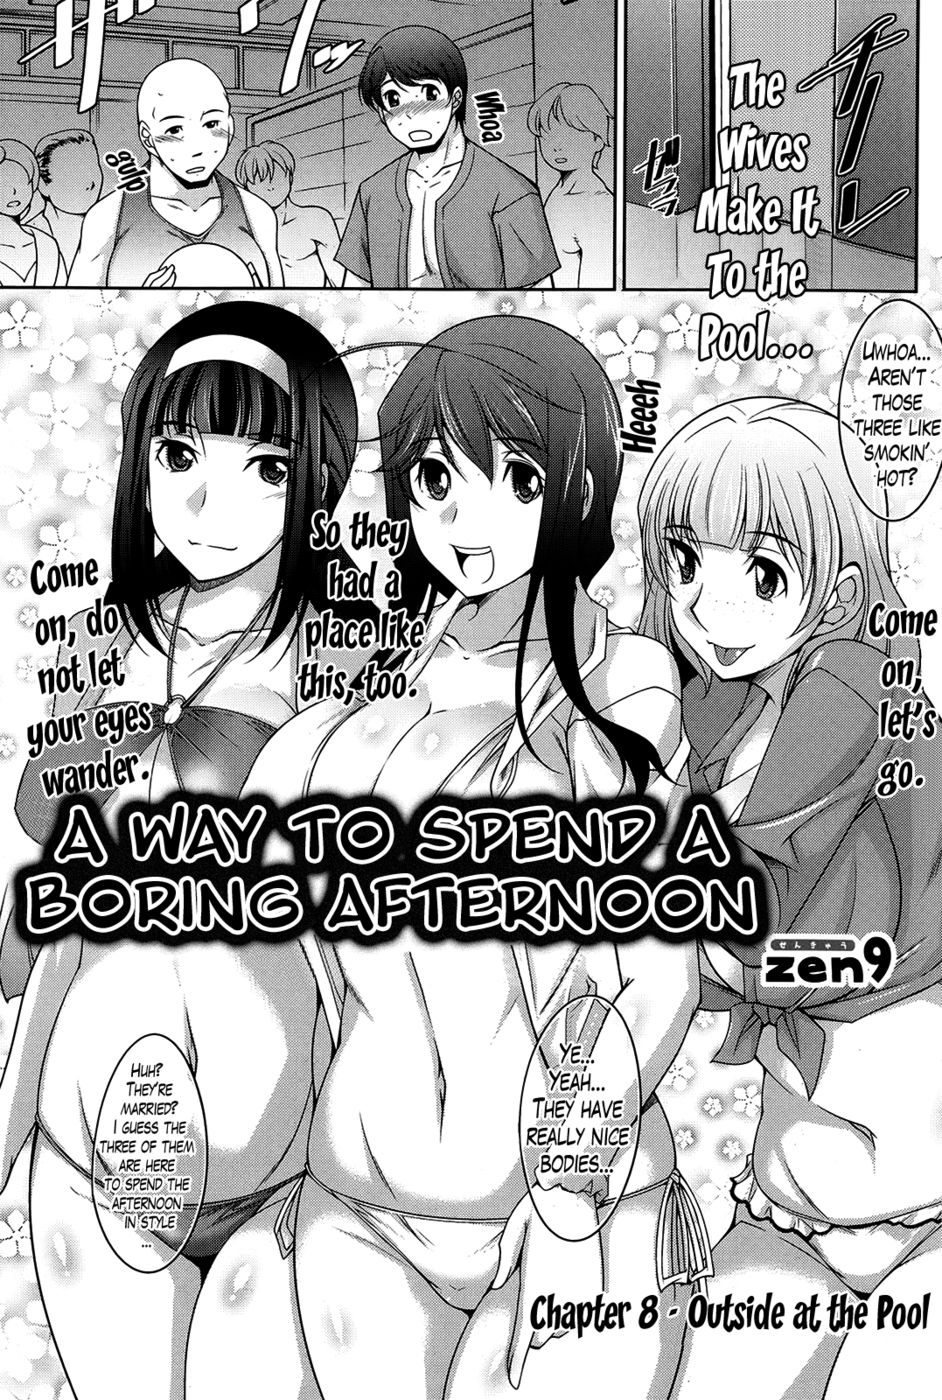 Hentai Manga Comic-A Way to Spend a Boring Afternoon-Chapter 8-1